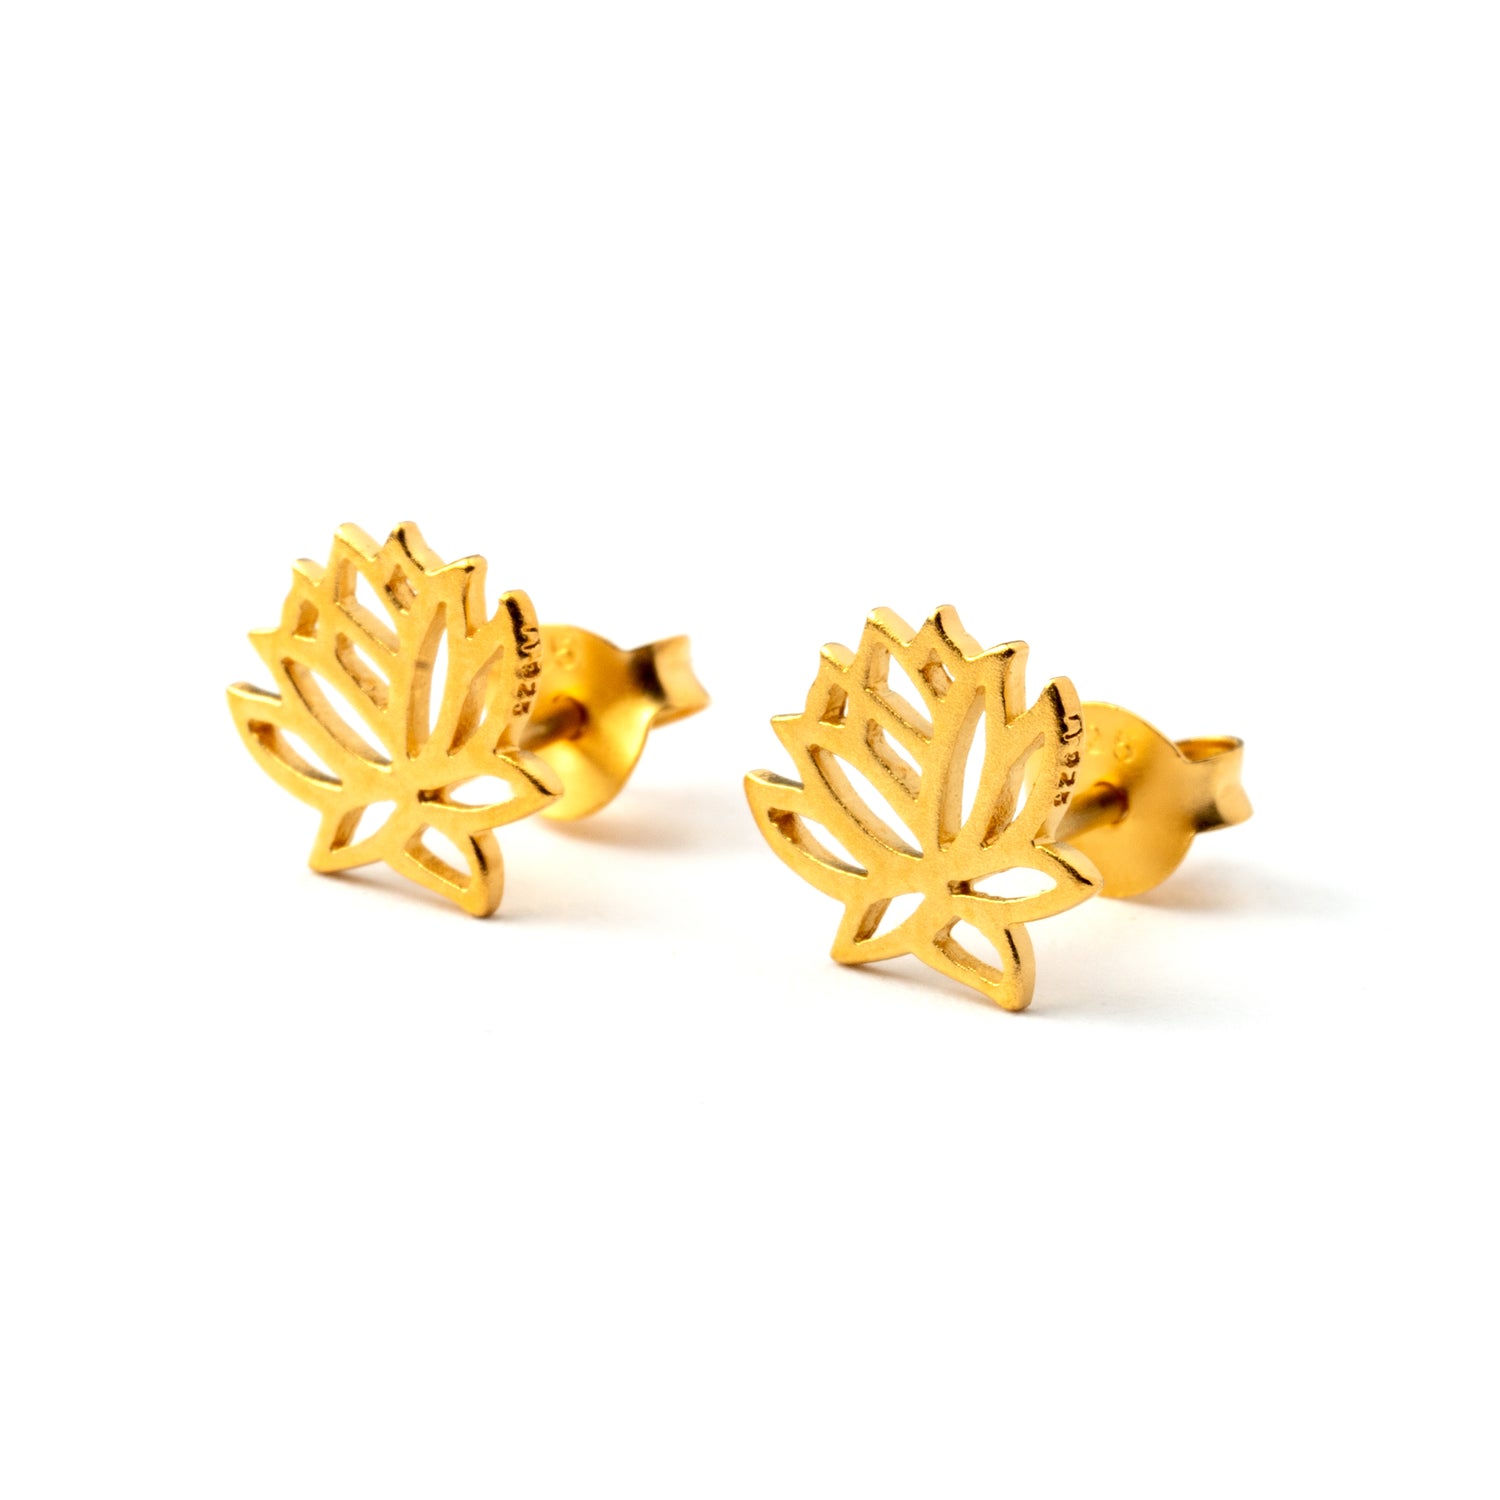 Gold Lotus contour stud earrings frontal view